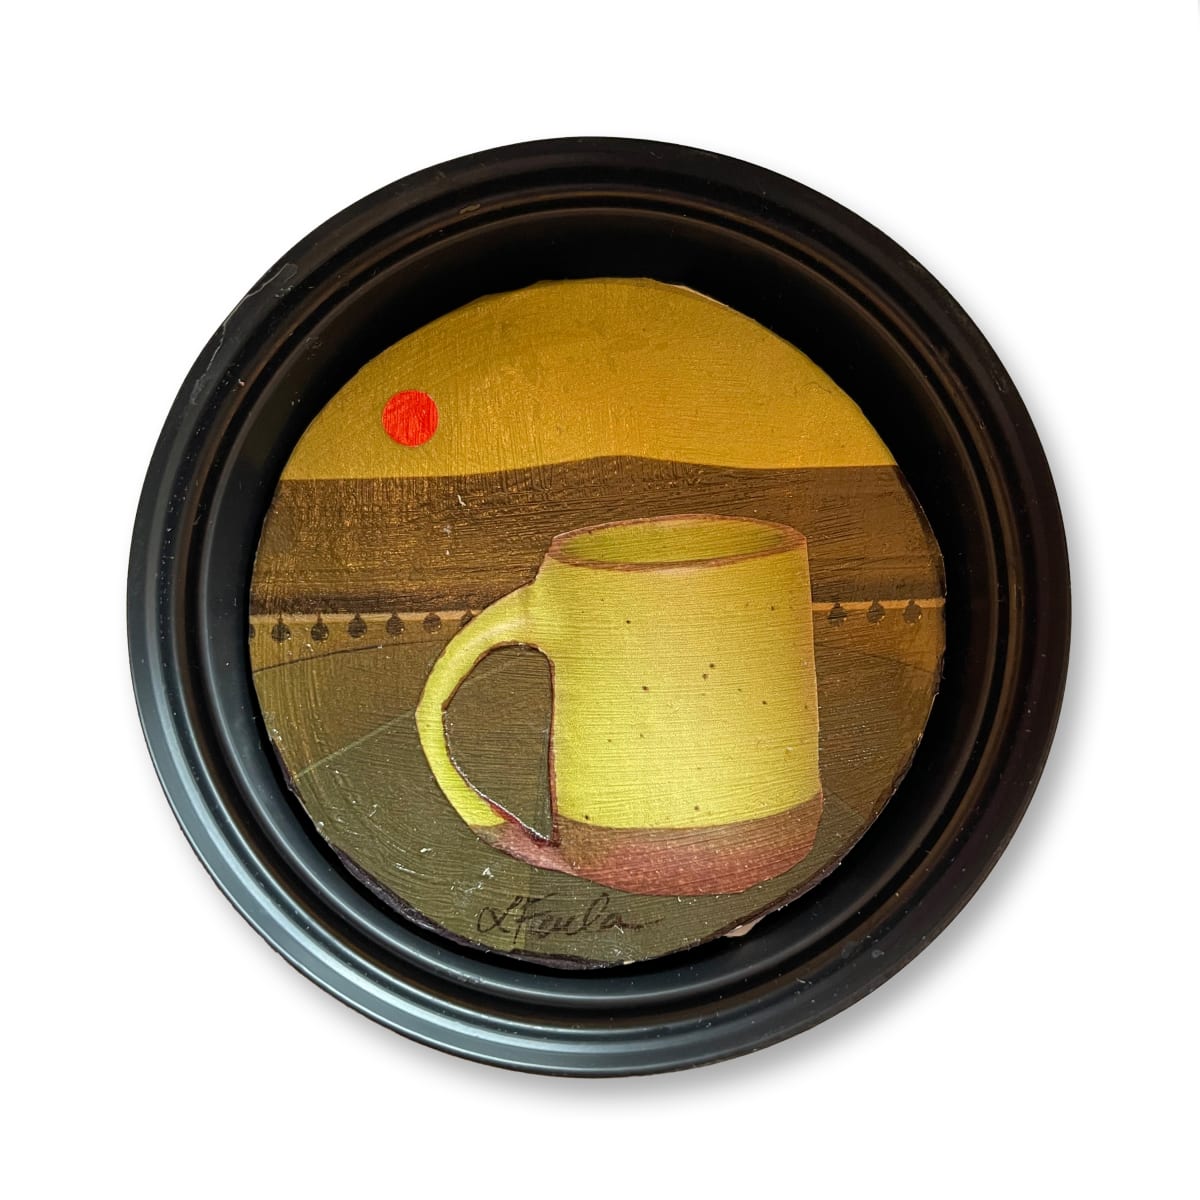 Untitled by Linda Feula  Image: Linda Feula, Untitled, 2021, New Jersey, USA , Coffee Cup Lid Collage